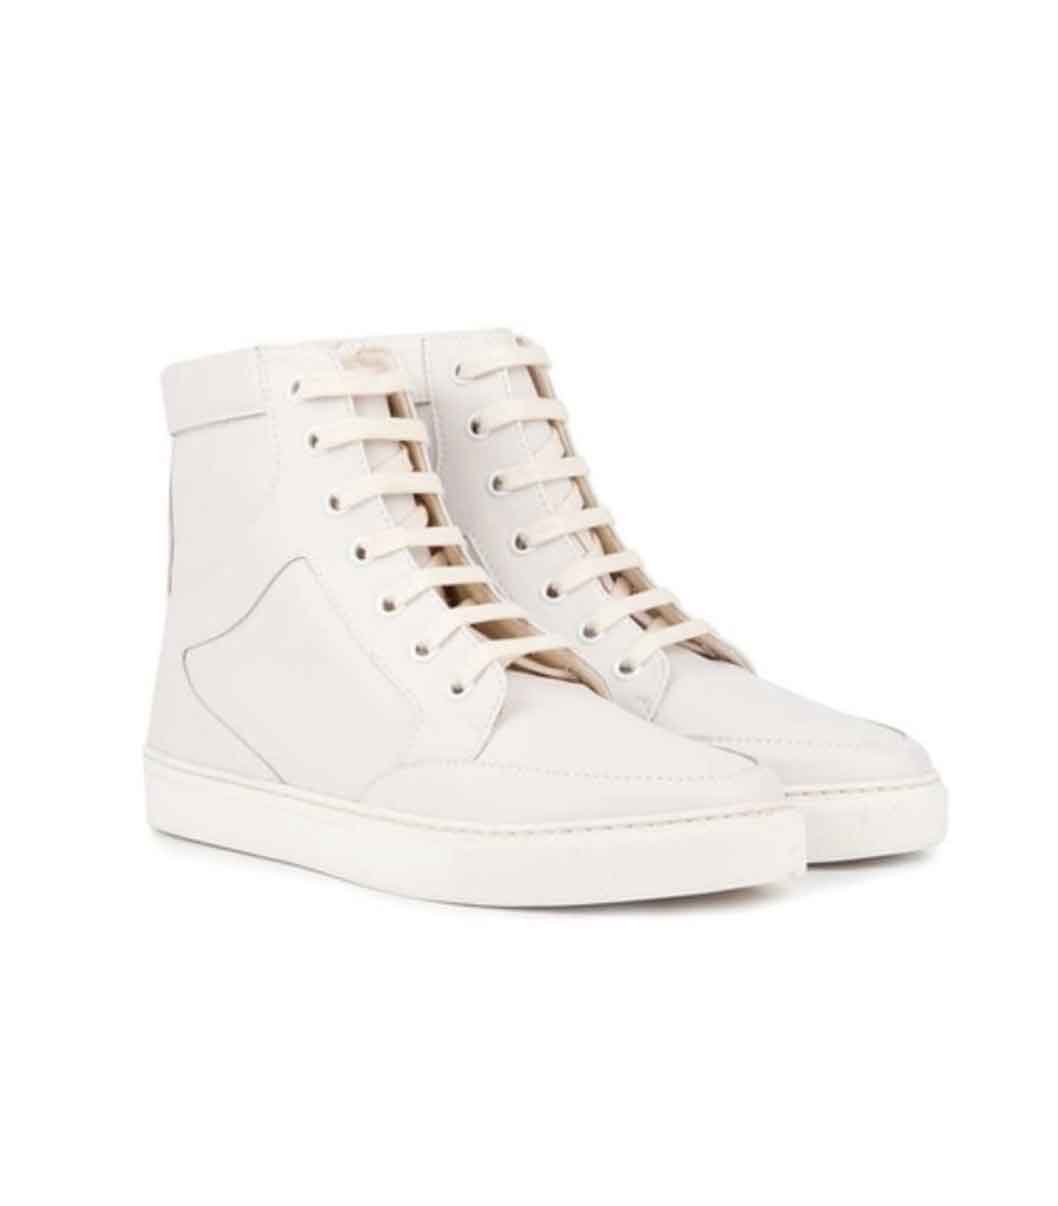 SUSTAINABLE WHITE SNEAKERS 六合彩开奖 BEYOND SKIN